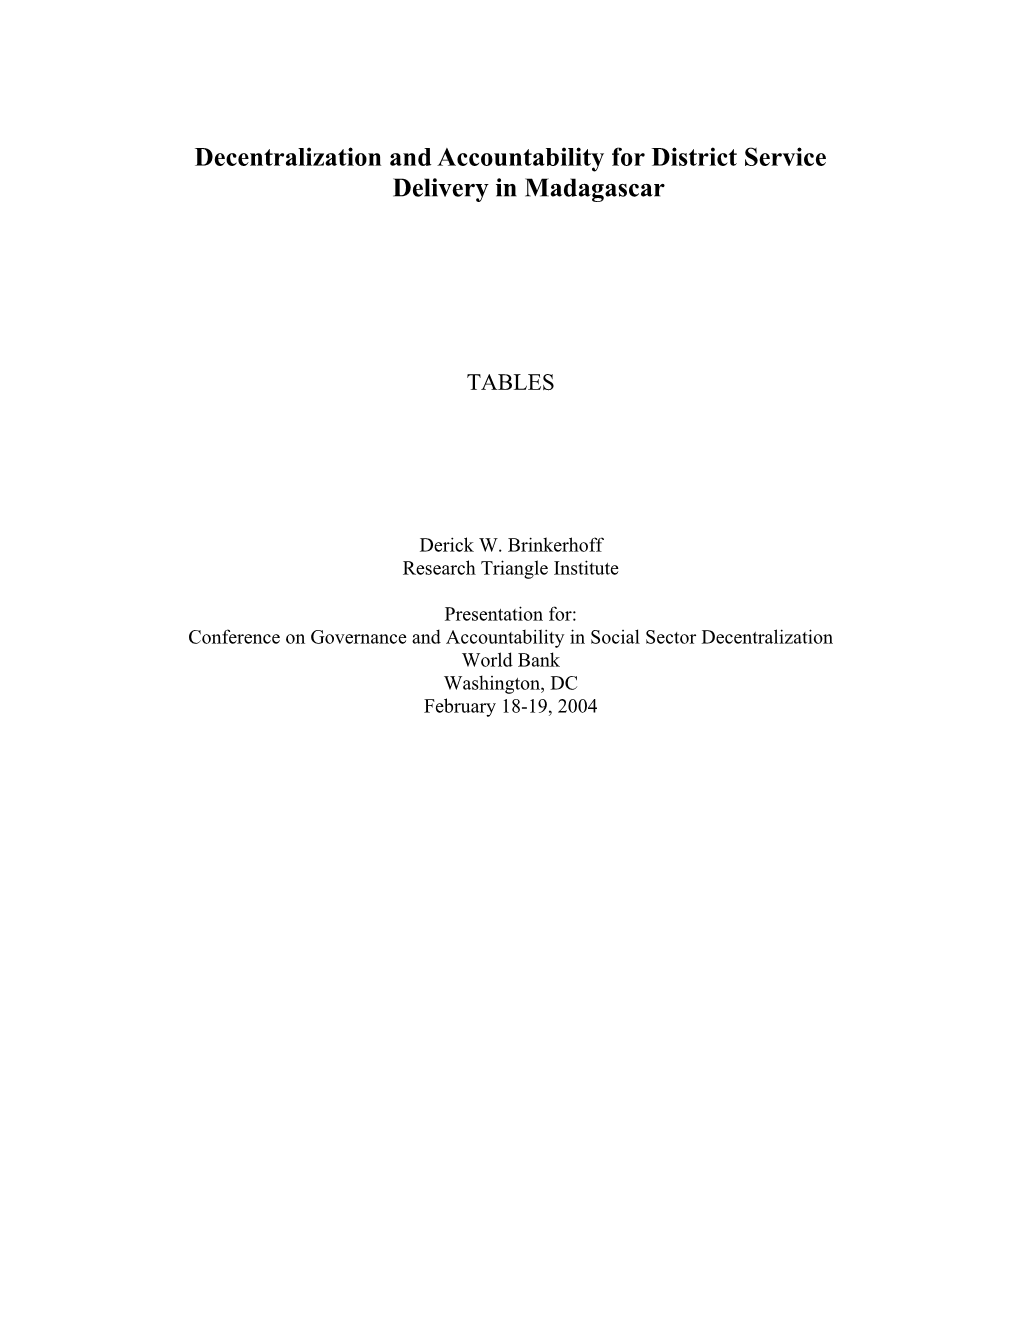 Decentralization And Accountability For District Service Delivery In Madagascar